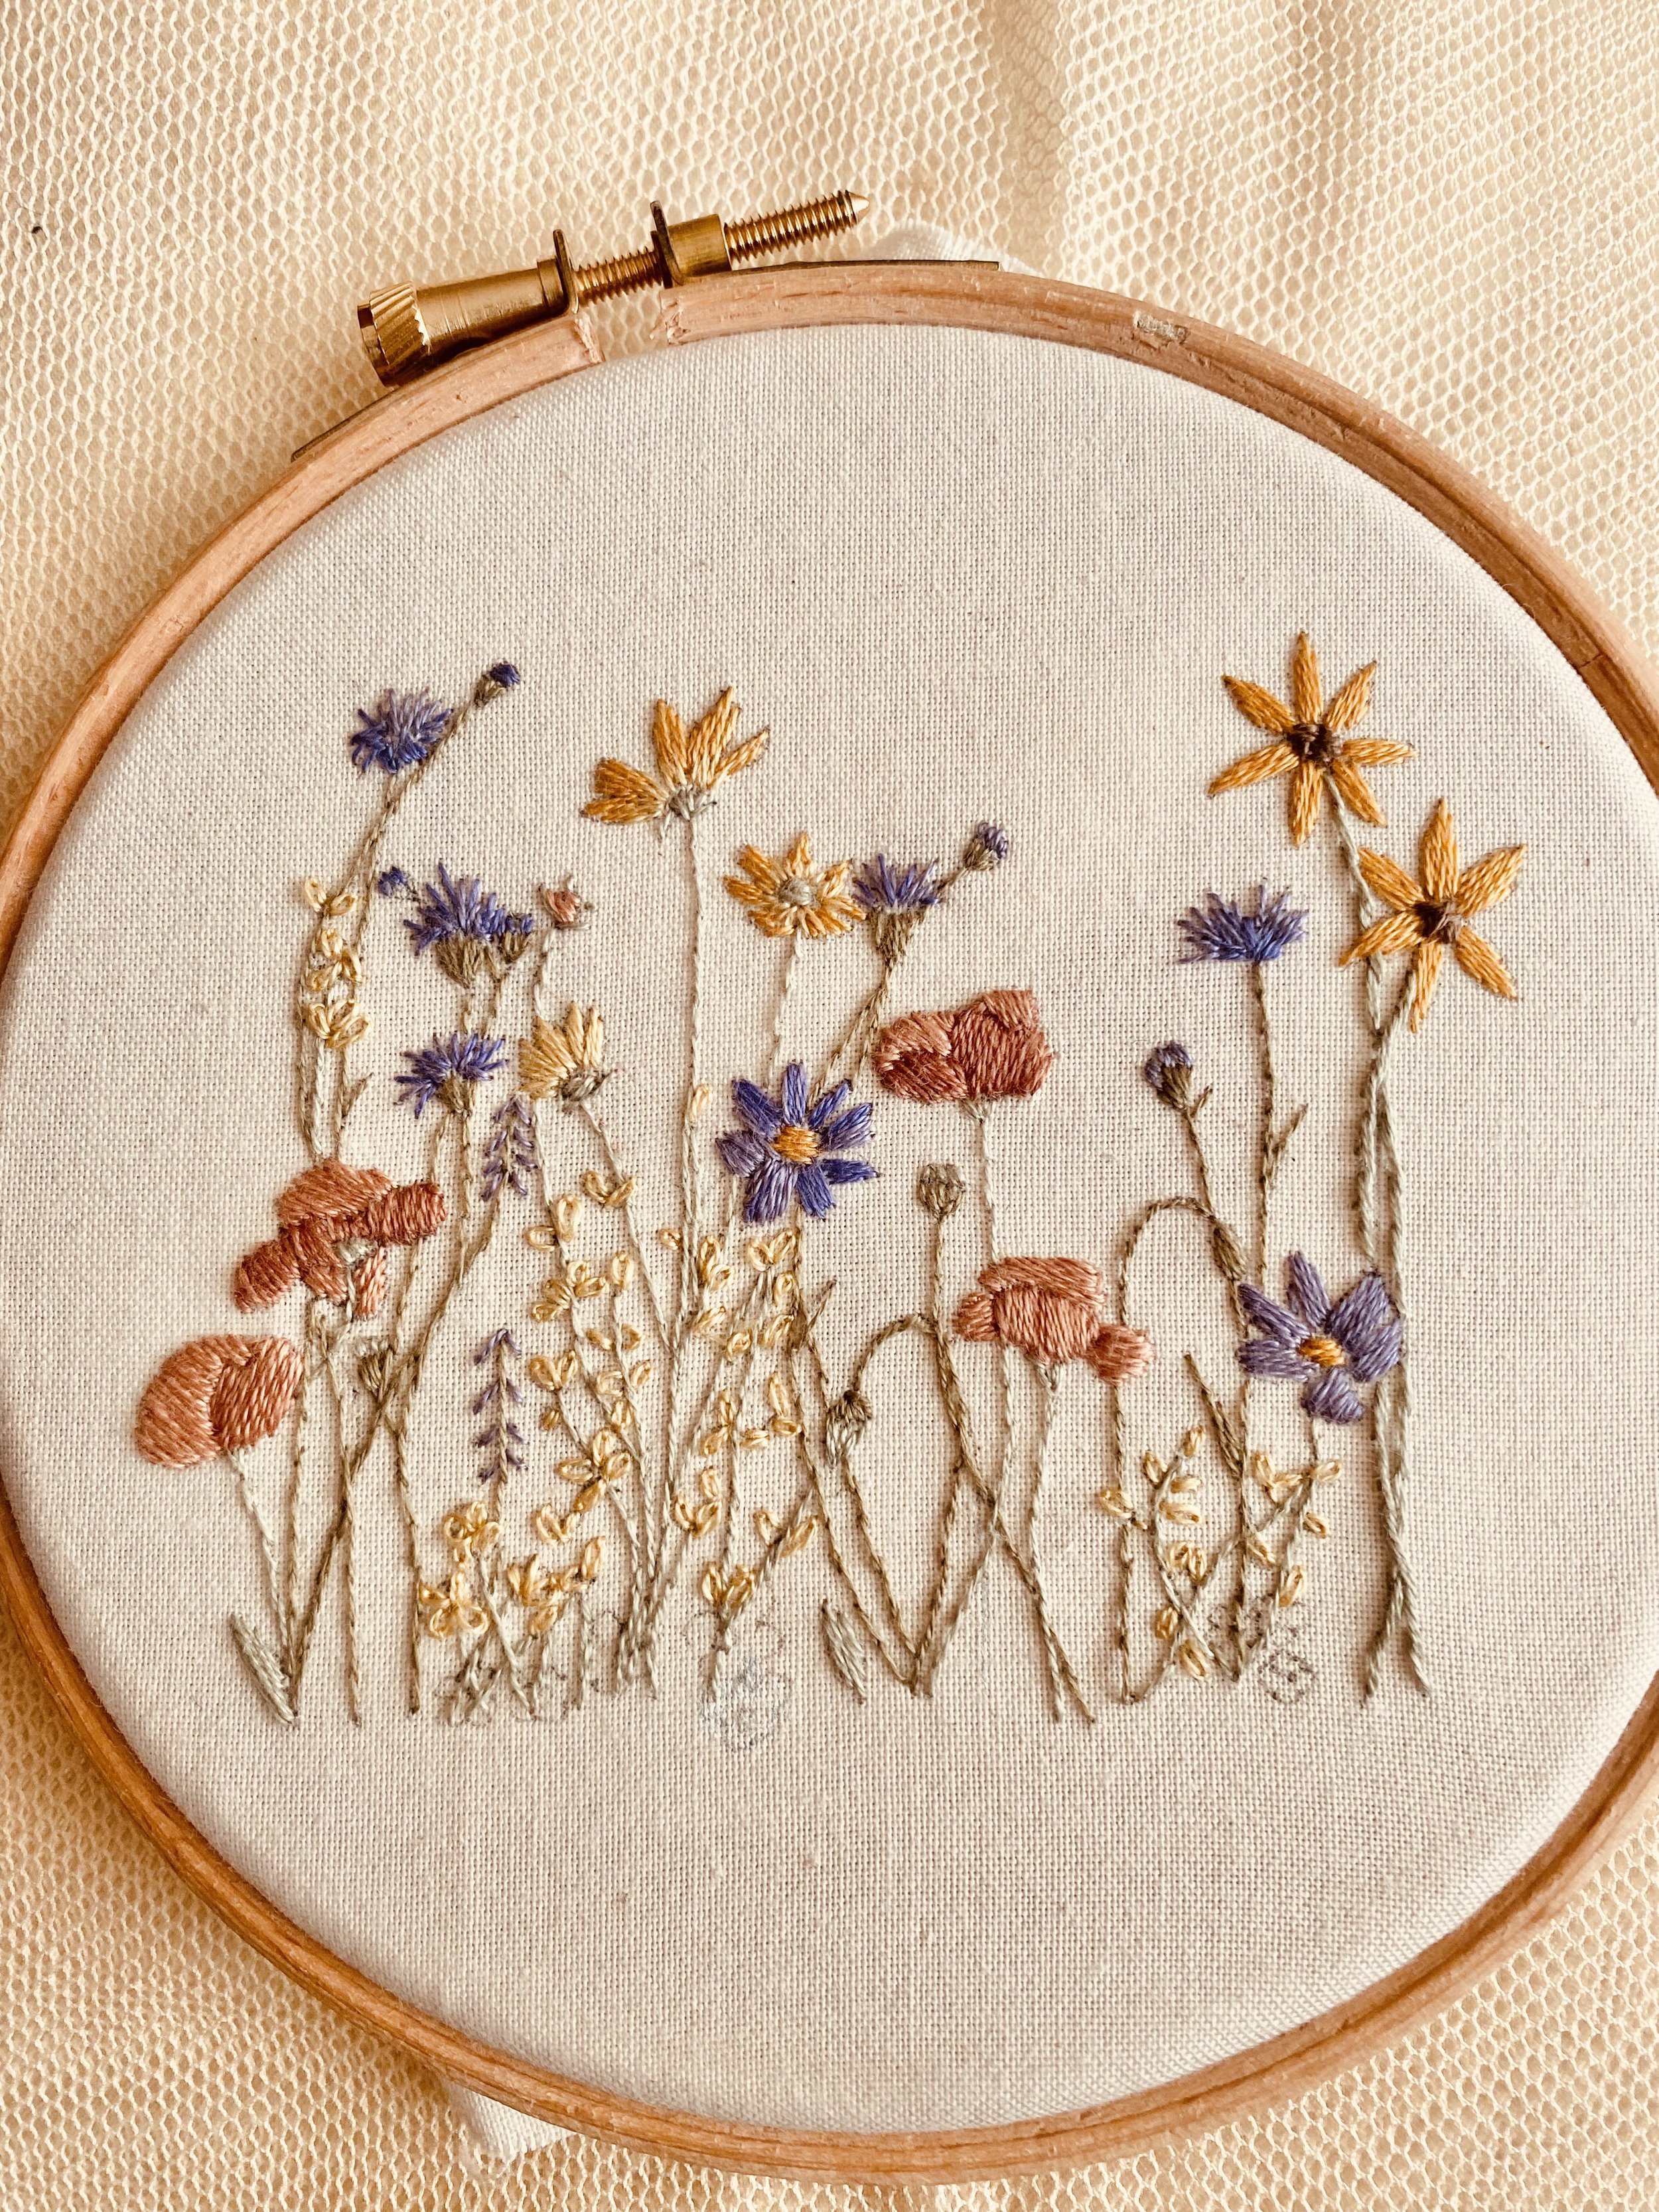 Blowing in the Breeze embroidery kit — Julias Broderie